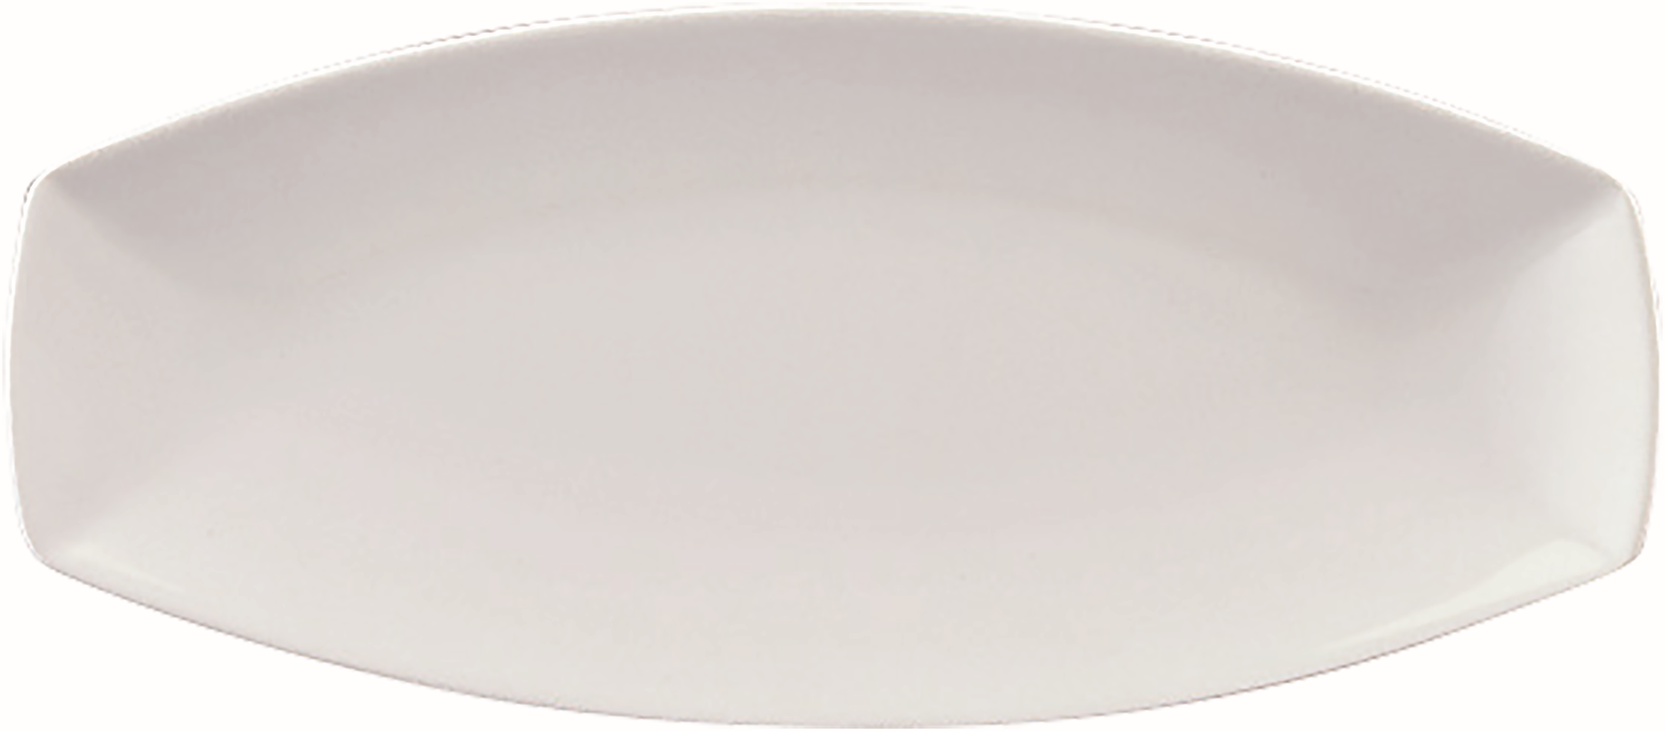 EVENT PLATTER OVAL 14X6CM SCHONWALD Germany